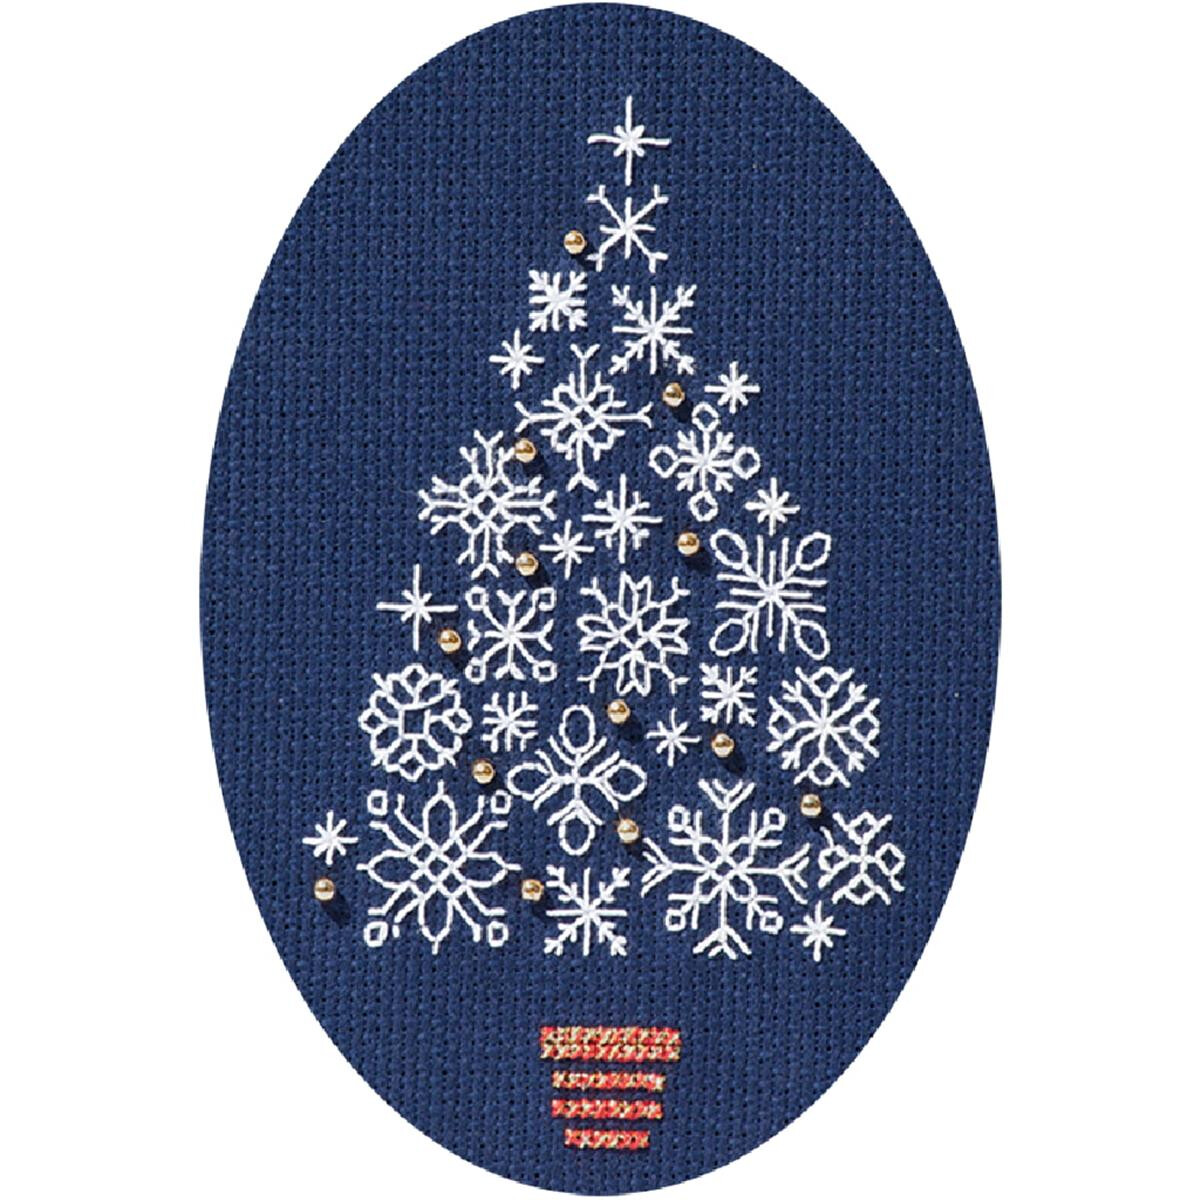 An embroidered Christmas tree design features white...